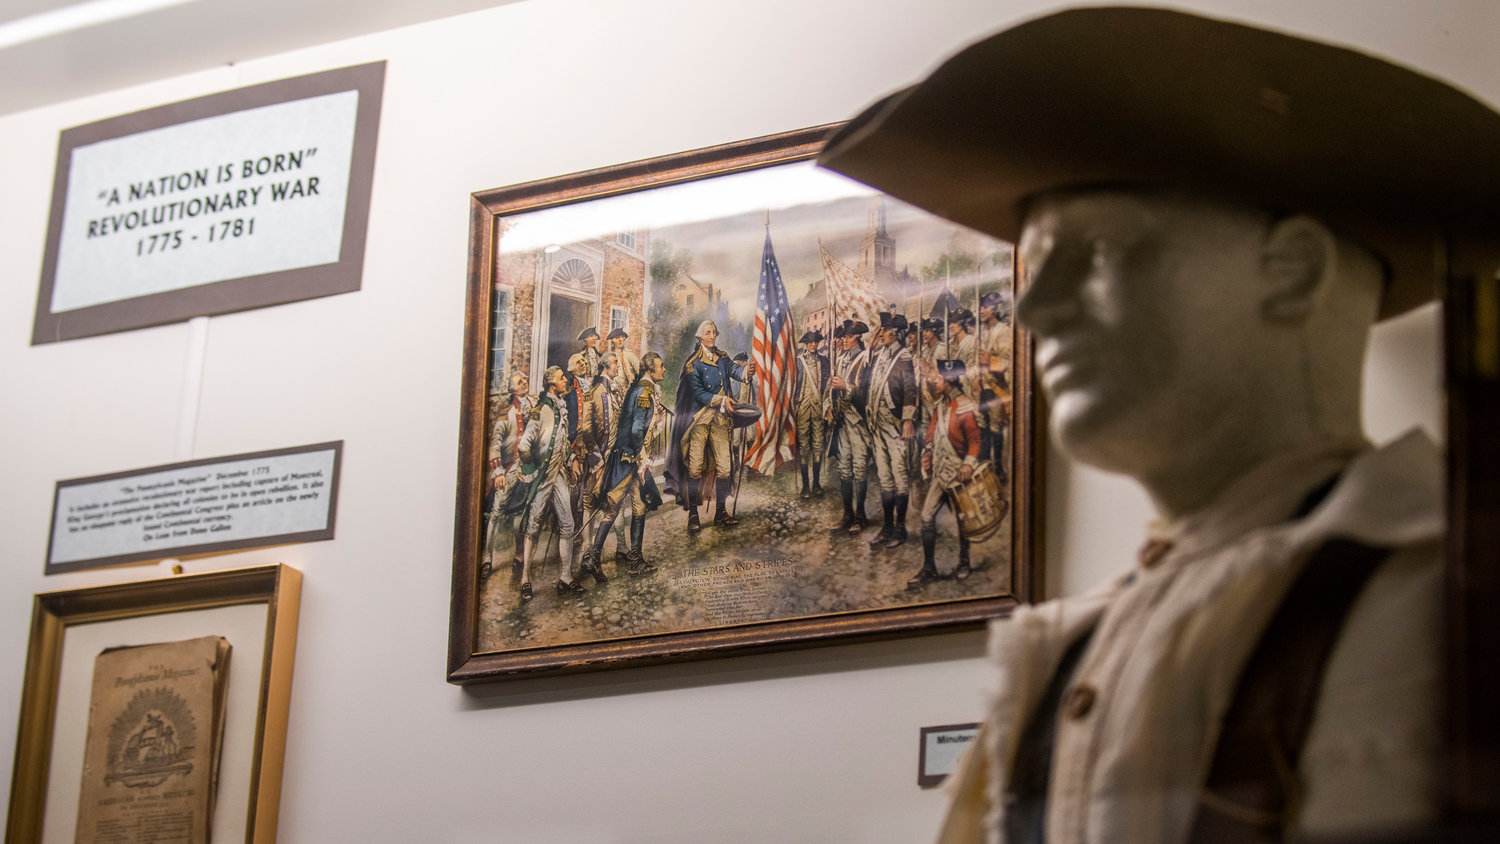 FILE PHOTO — Artwork depicts images from the Revolutionary War on display inside the Veterans Memorial Museum in Chehalis.